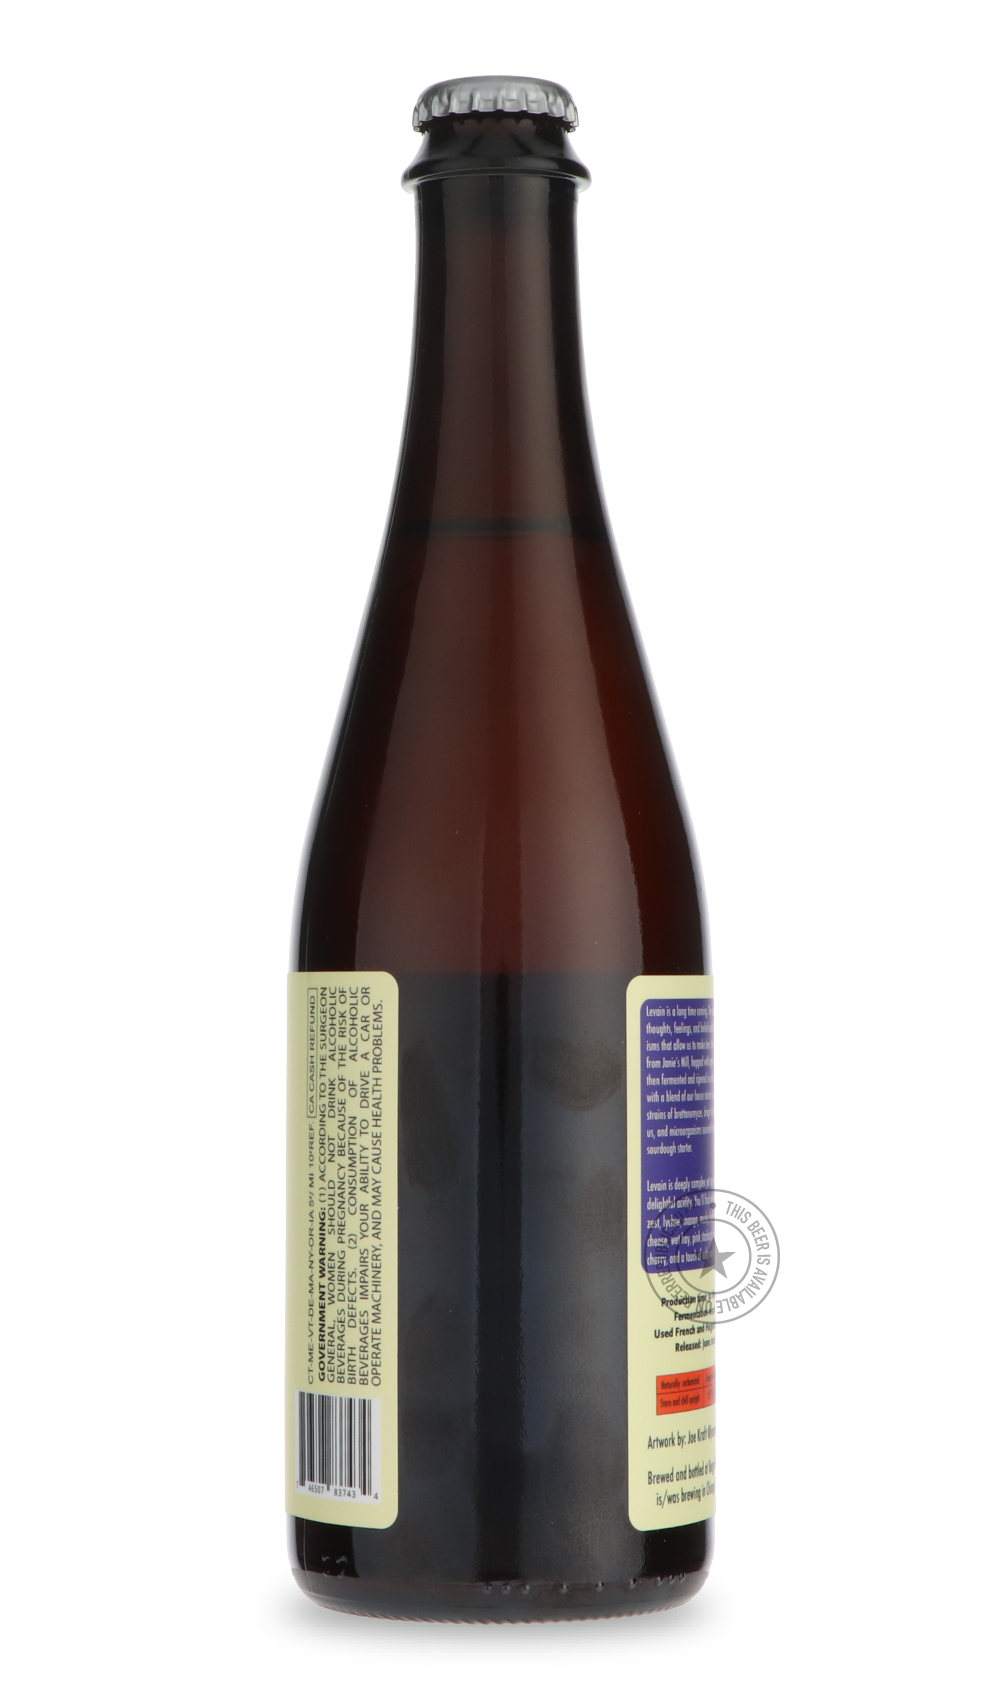 -is/was- Levain 2022 Blend-Sour / Wild & Fruity- Only @ Beer Republic - The best online beer store for American & Canadian craft beer - Buy beer online from the USA and Canada - Bier online kopen - Amerikaans bier kopen - Craft beer store - Craft beer kopen - Amerikanisch bier kaufen - Bier online kaufen - Acheter biere online - IPA - Stout - Porter - New England IPA - Hazy IPA - Imperial Stout - Barrel Aged - Barrel Aged Imperial Stout - Brown - Dark beer - Blond - Blonde - Pilsner - Lager - Wheat - Weizen